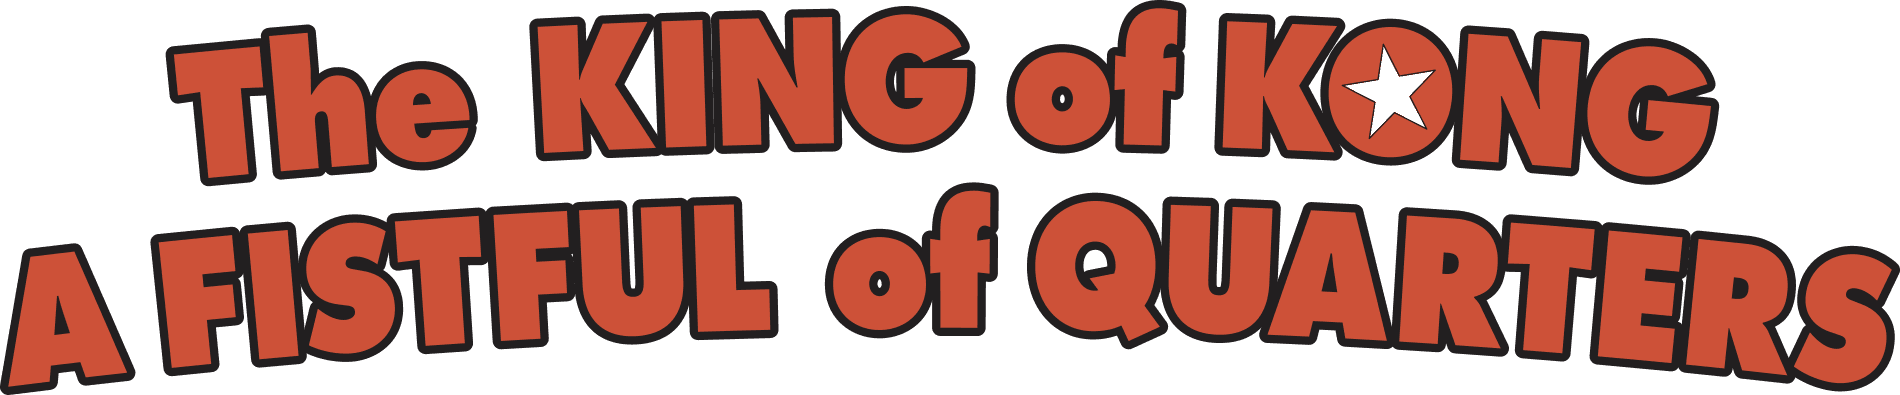 The King of Kong: A Fistful of Quarters logo